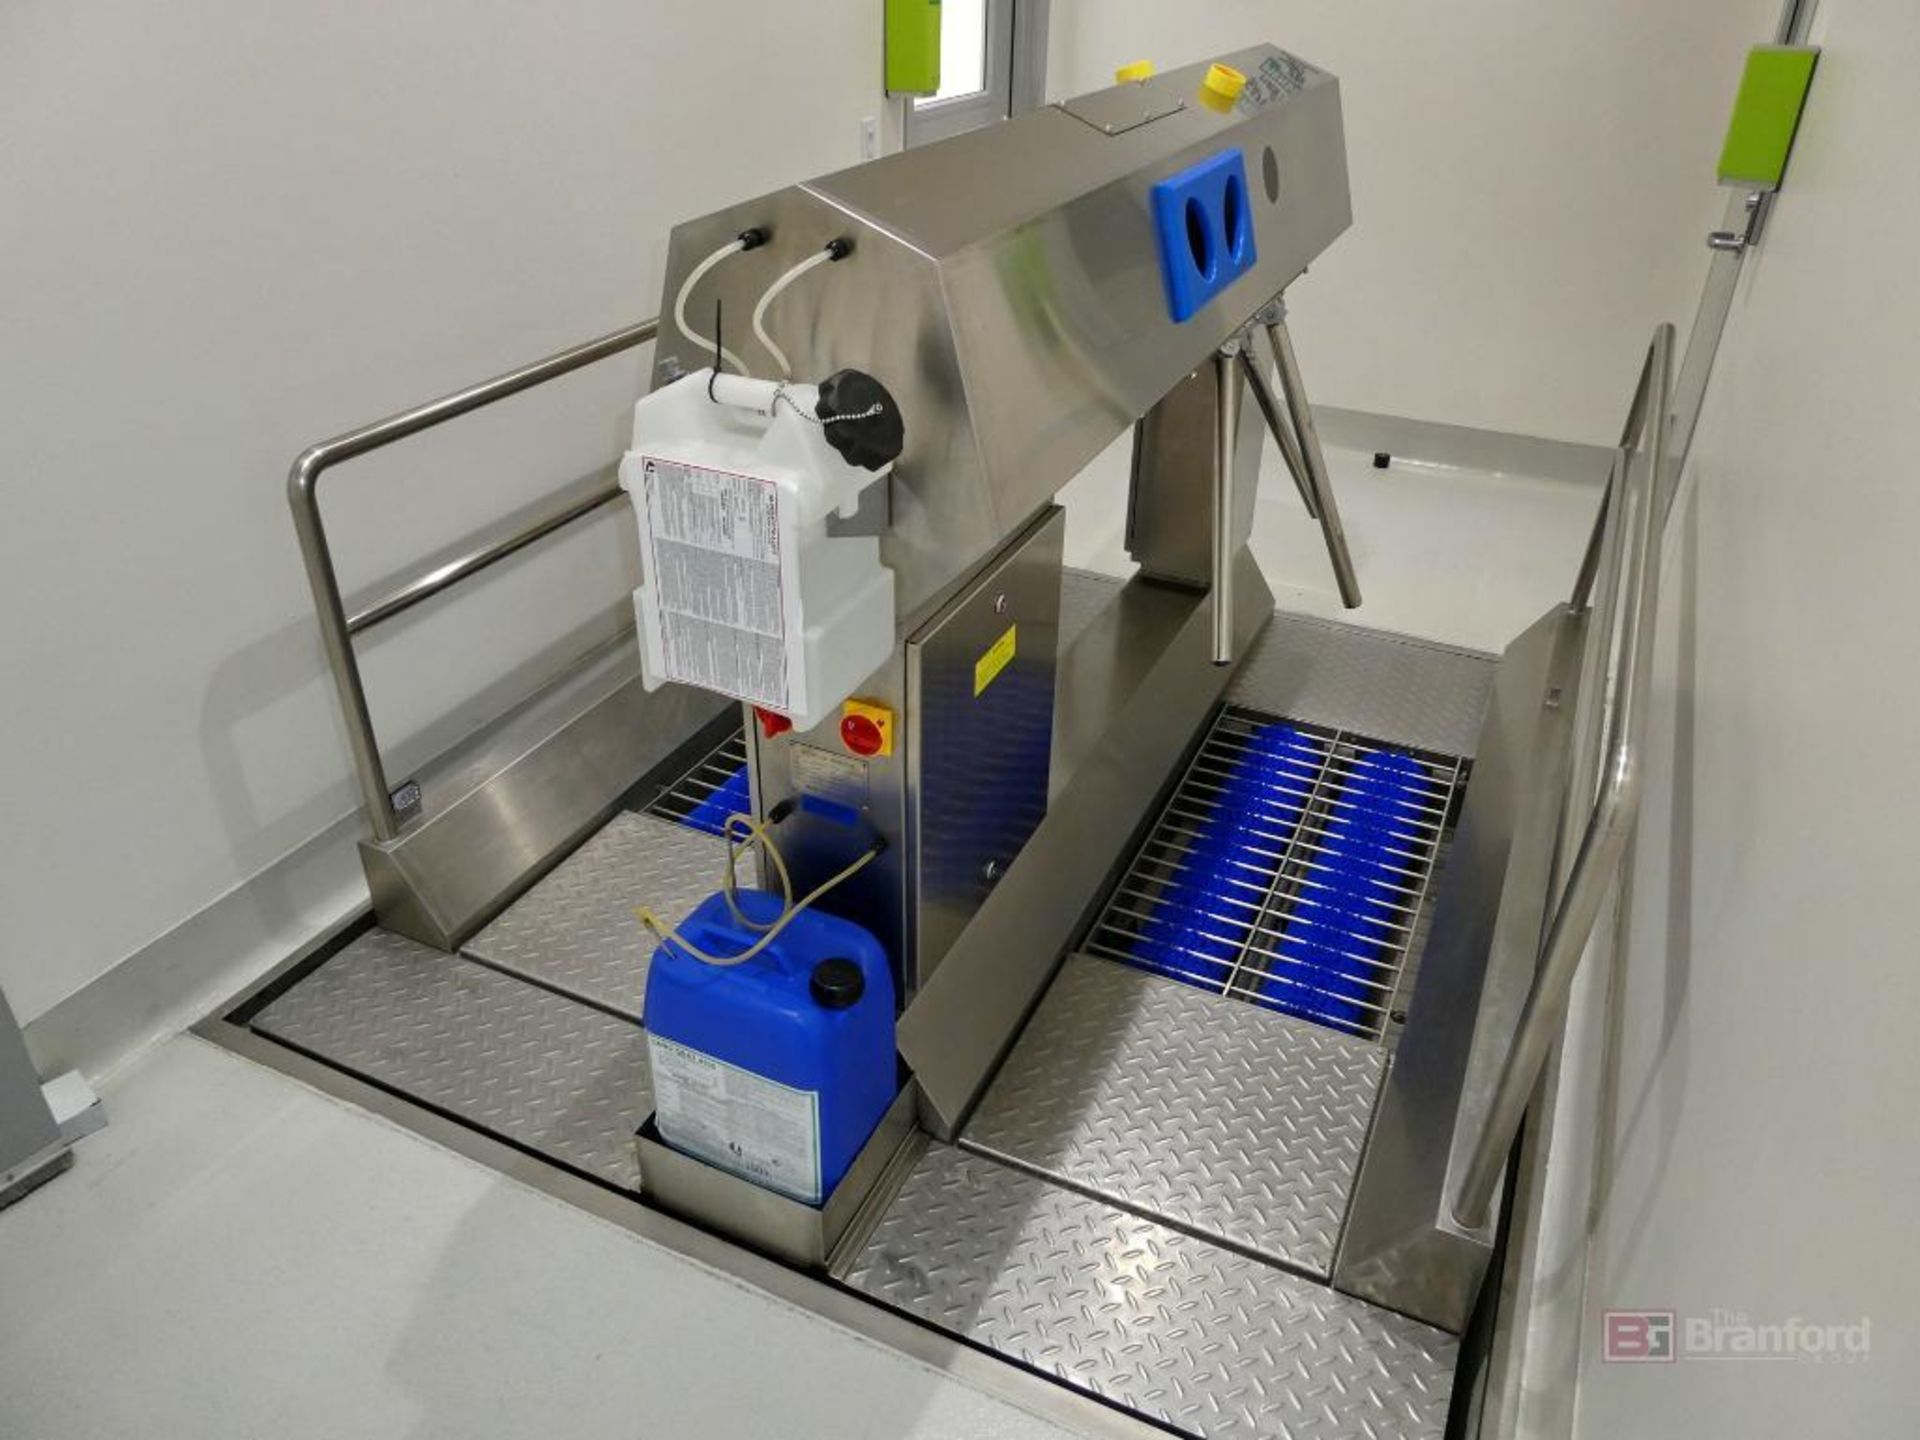 2020 ITEC Frontmatec Hygiene Systems Automatic Walk-Through Sole and Boot Cleaning Machine - Image 4 of 7